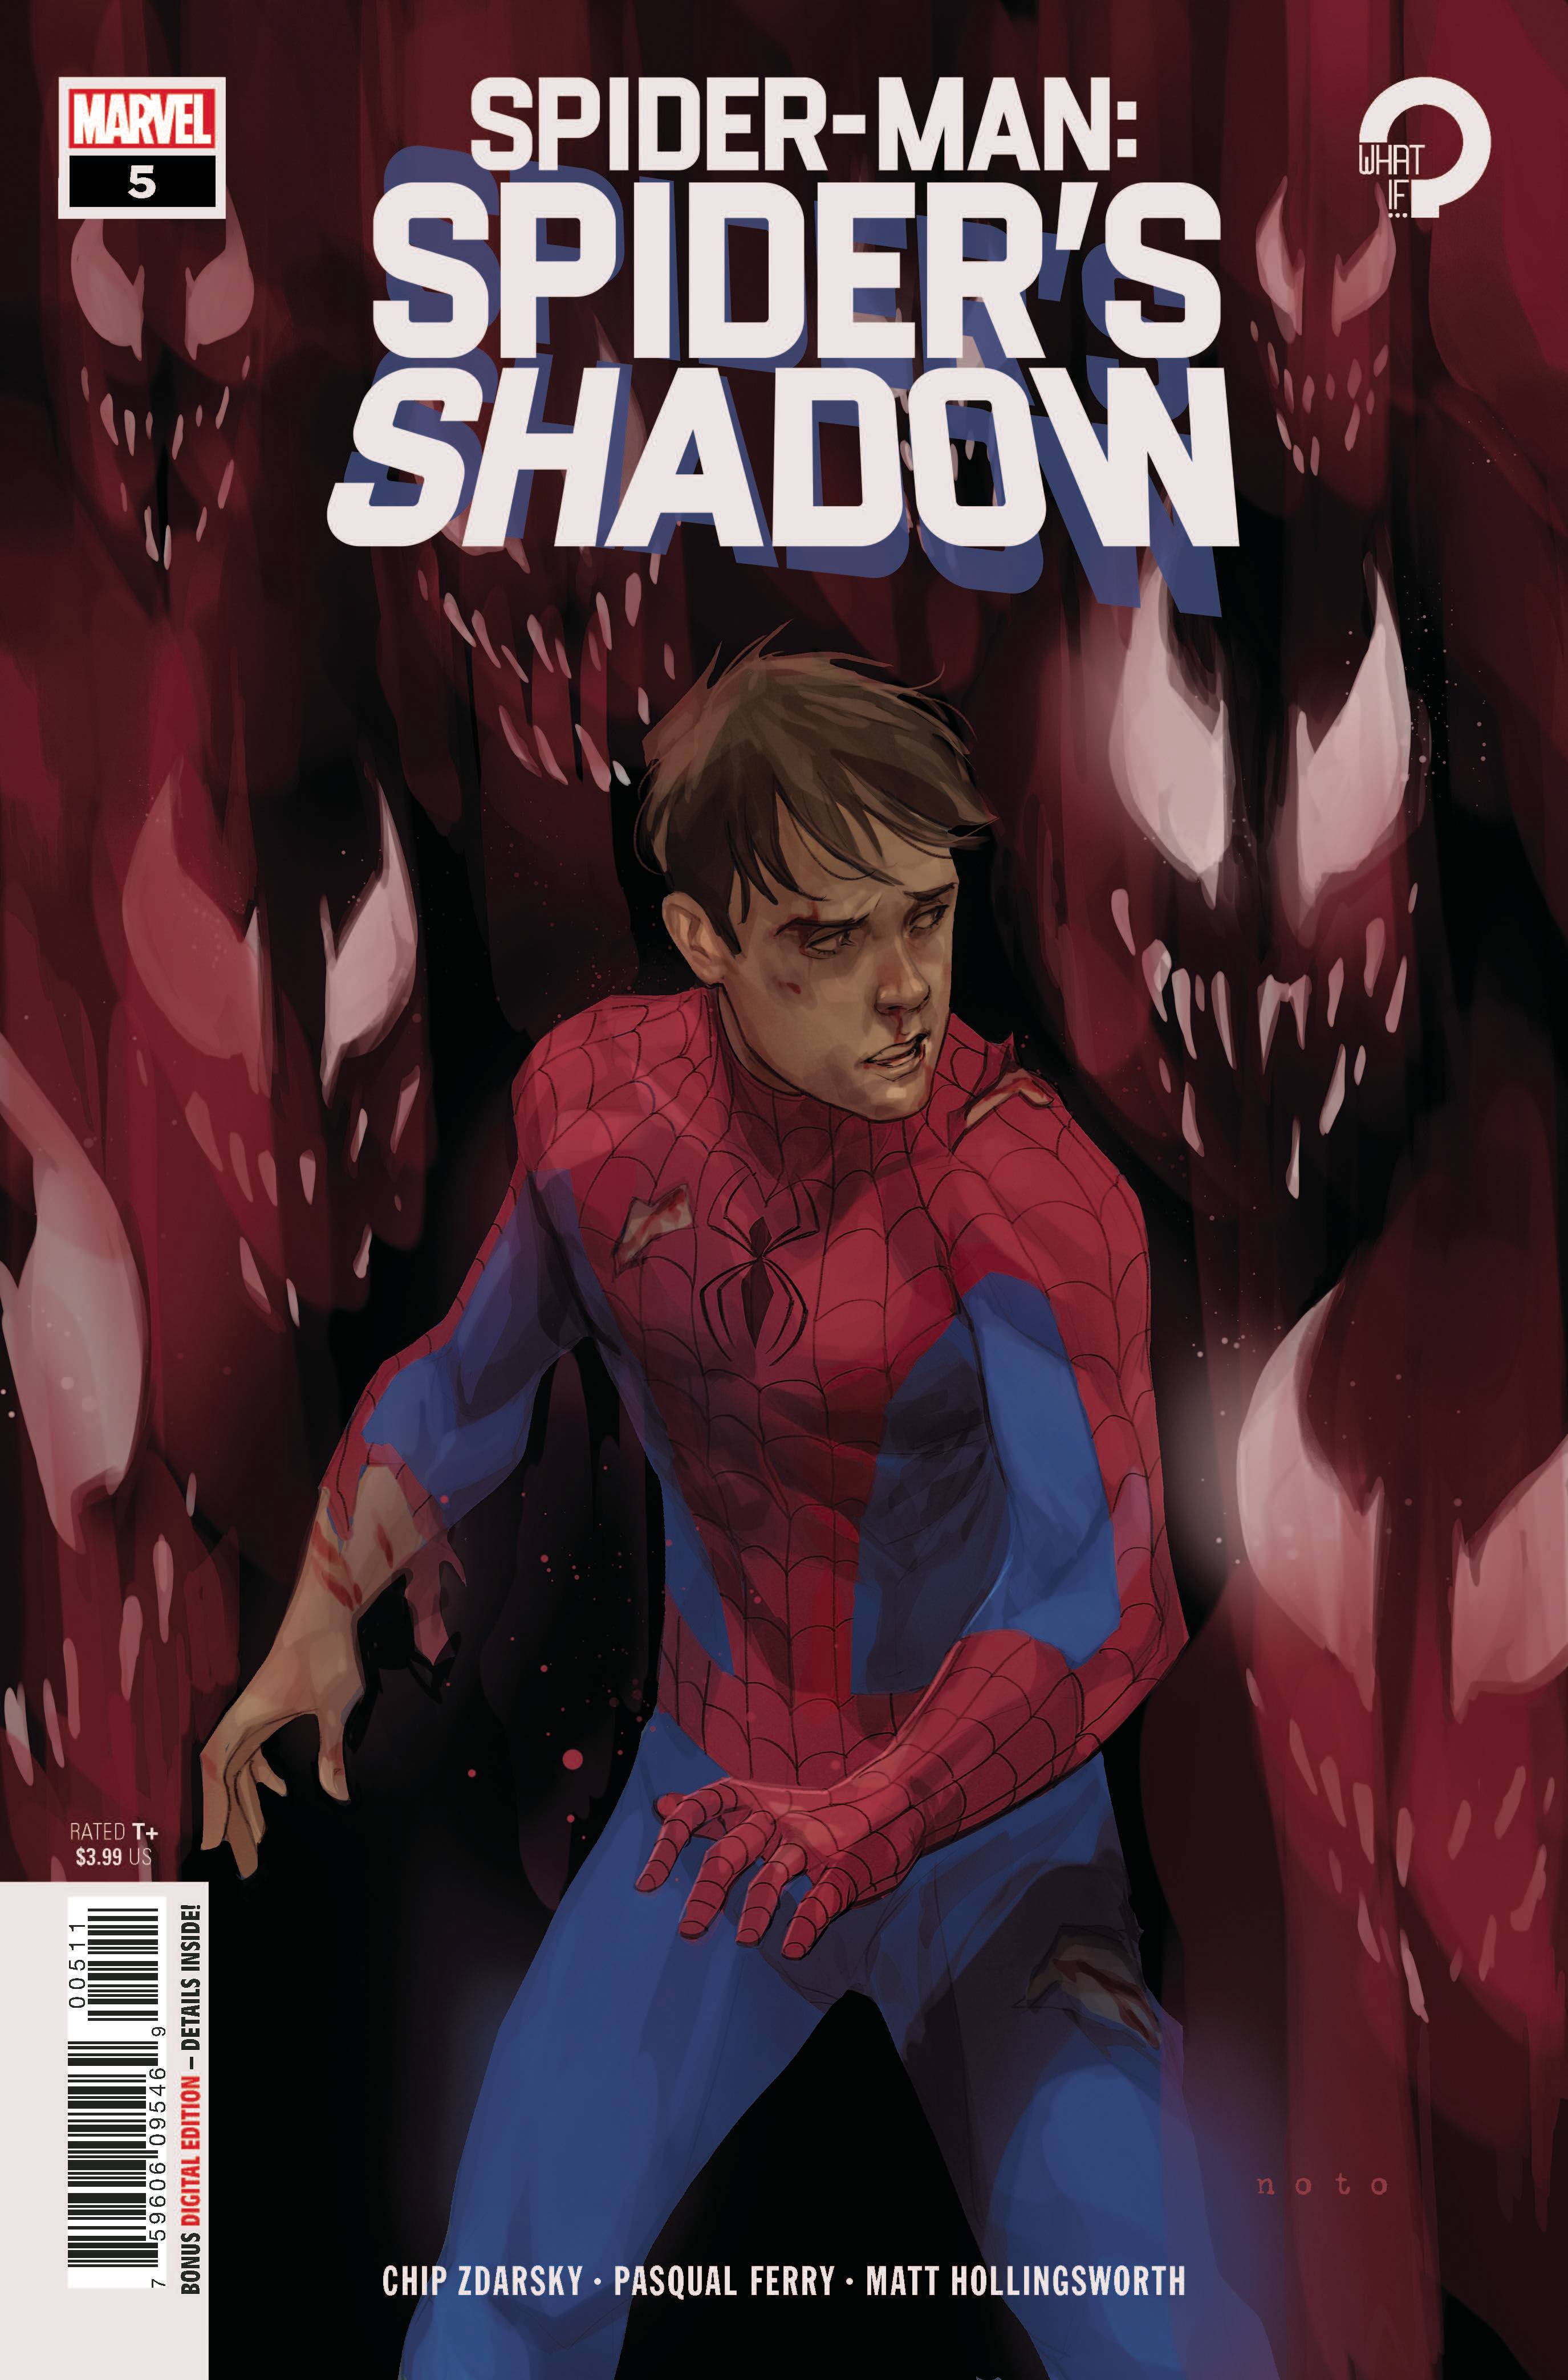 Spider-Man Spiders Shadow #5 (OF 5) King Gaming